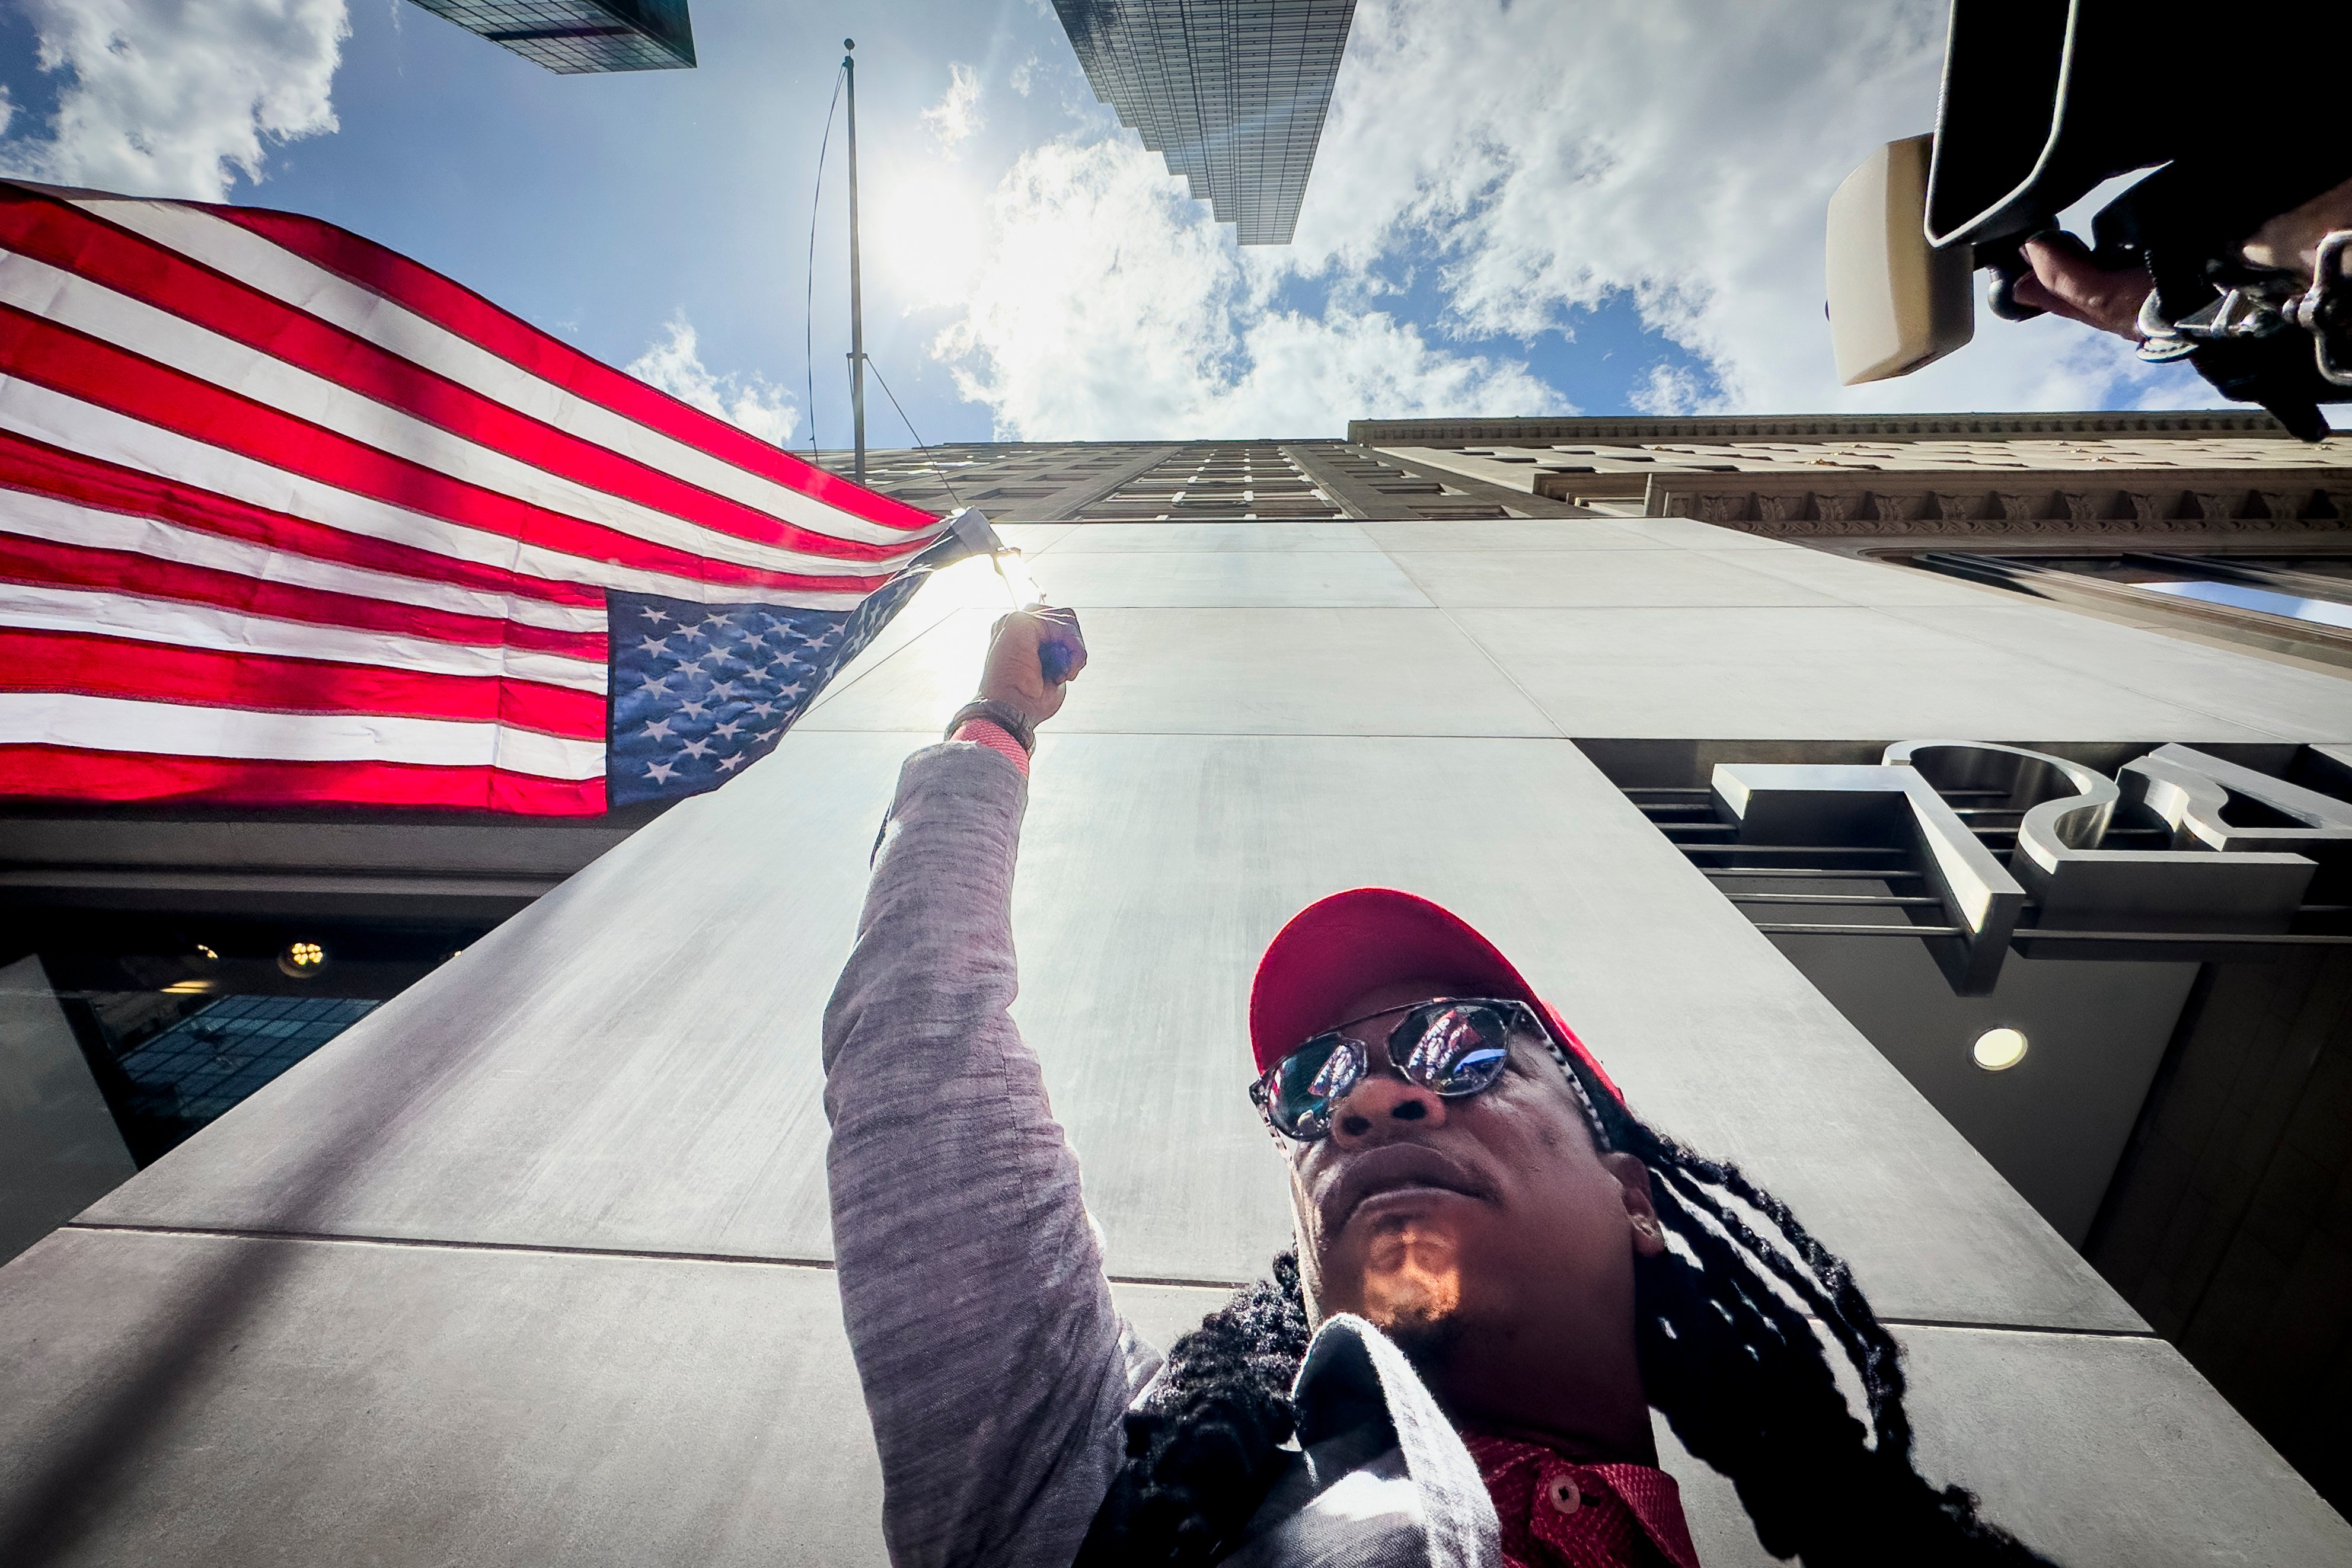 A supporter of former president Donald Trump waves an inverted American flag during a demonstration outside Trump Tower in New York on May 31. Photo: AP